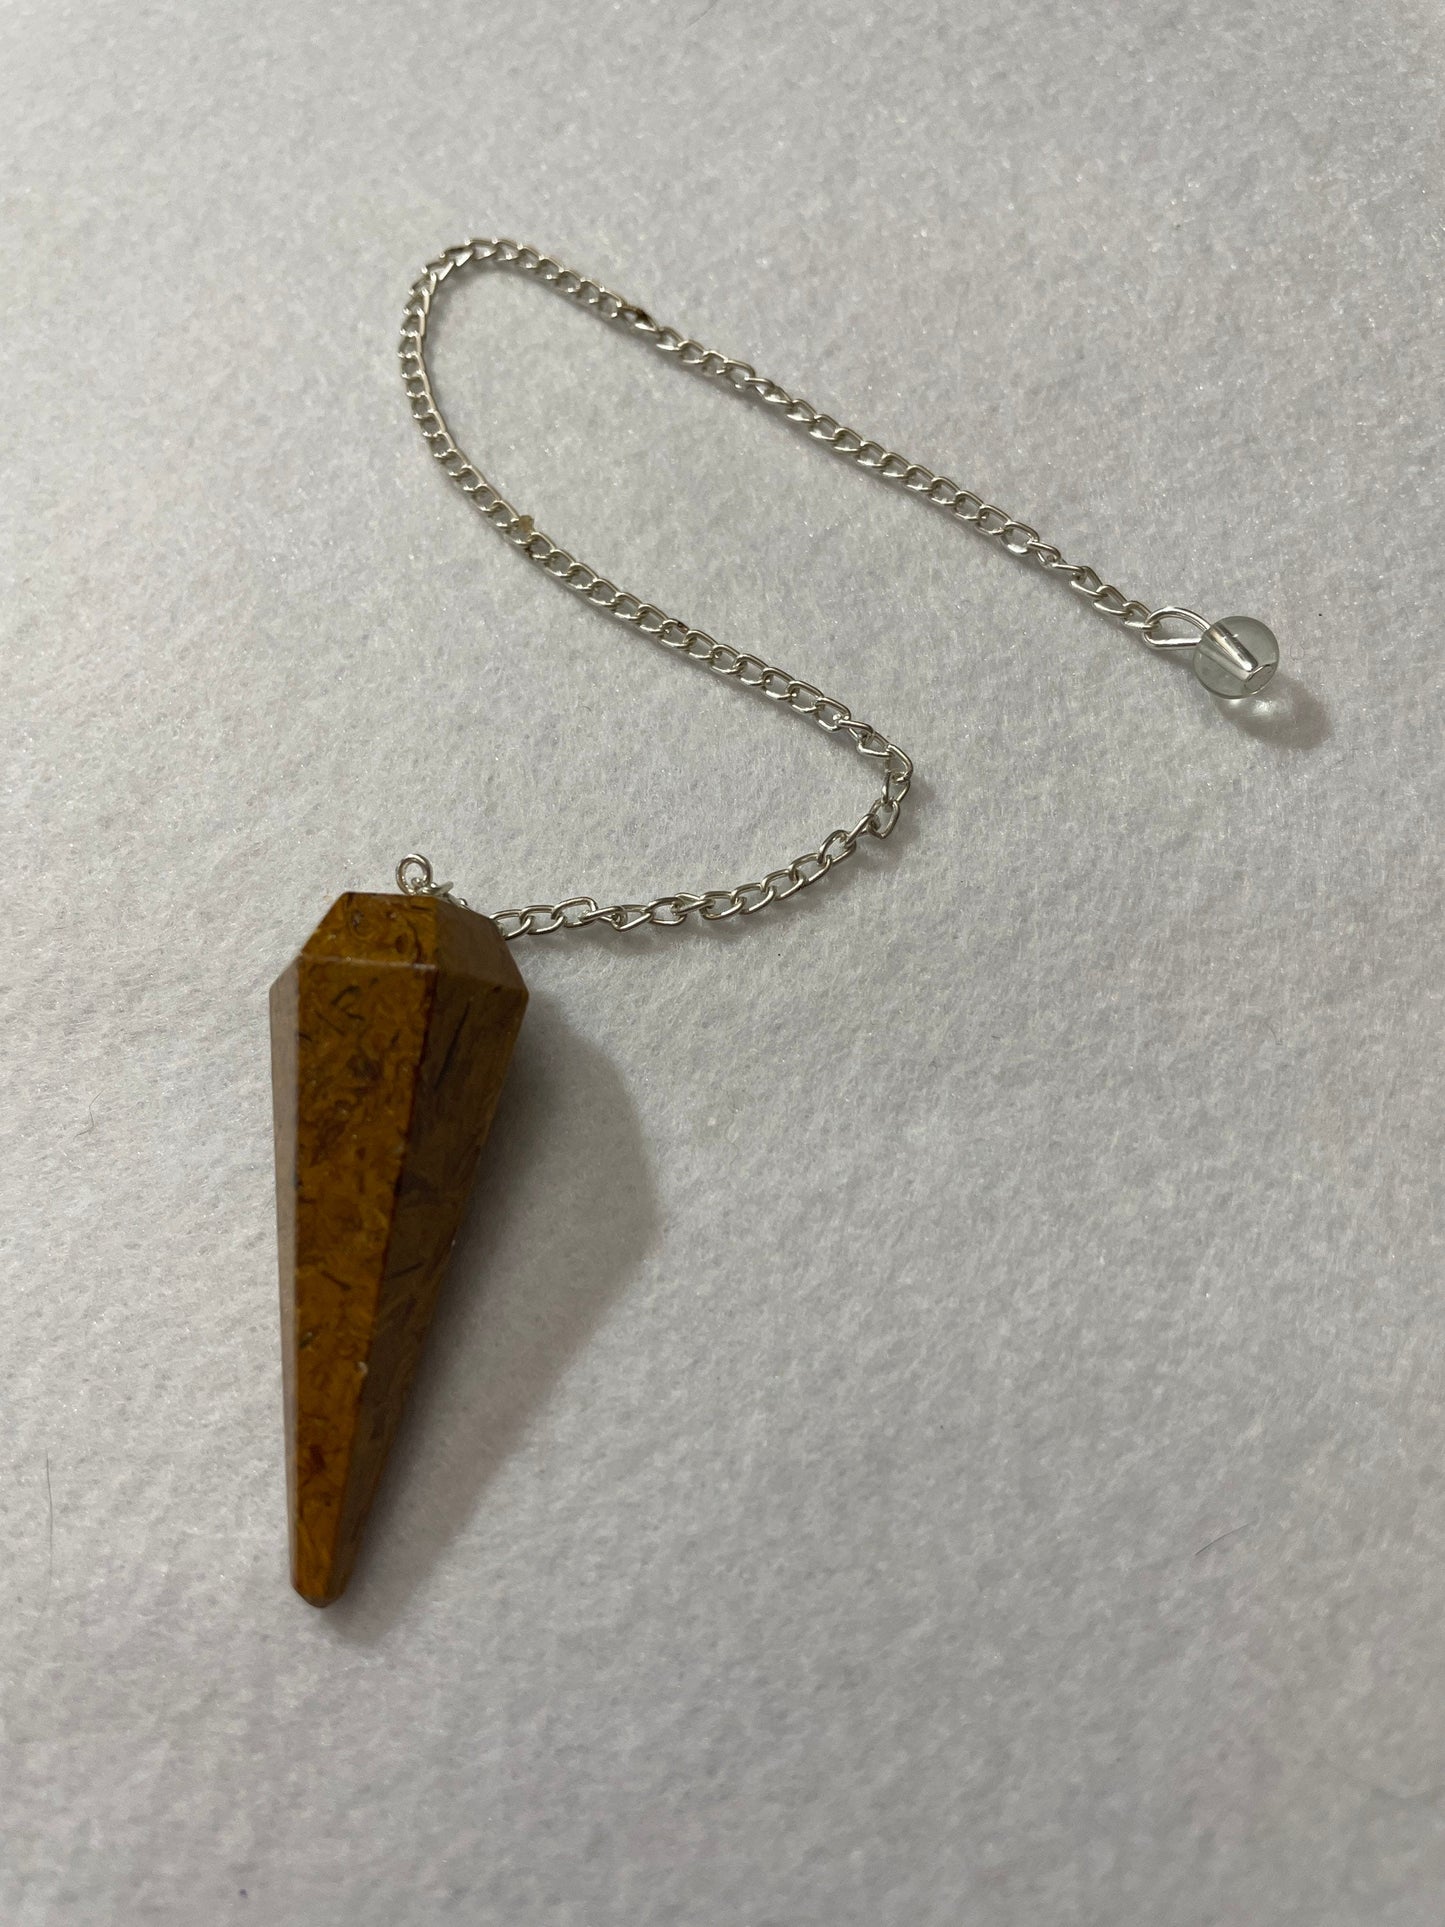 This beautiful Yellow Jasper Pendulum is 1.75” with the chain it is approximately 10.5”.